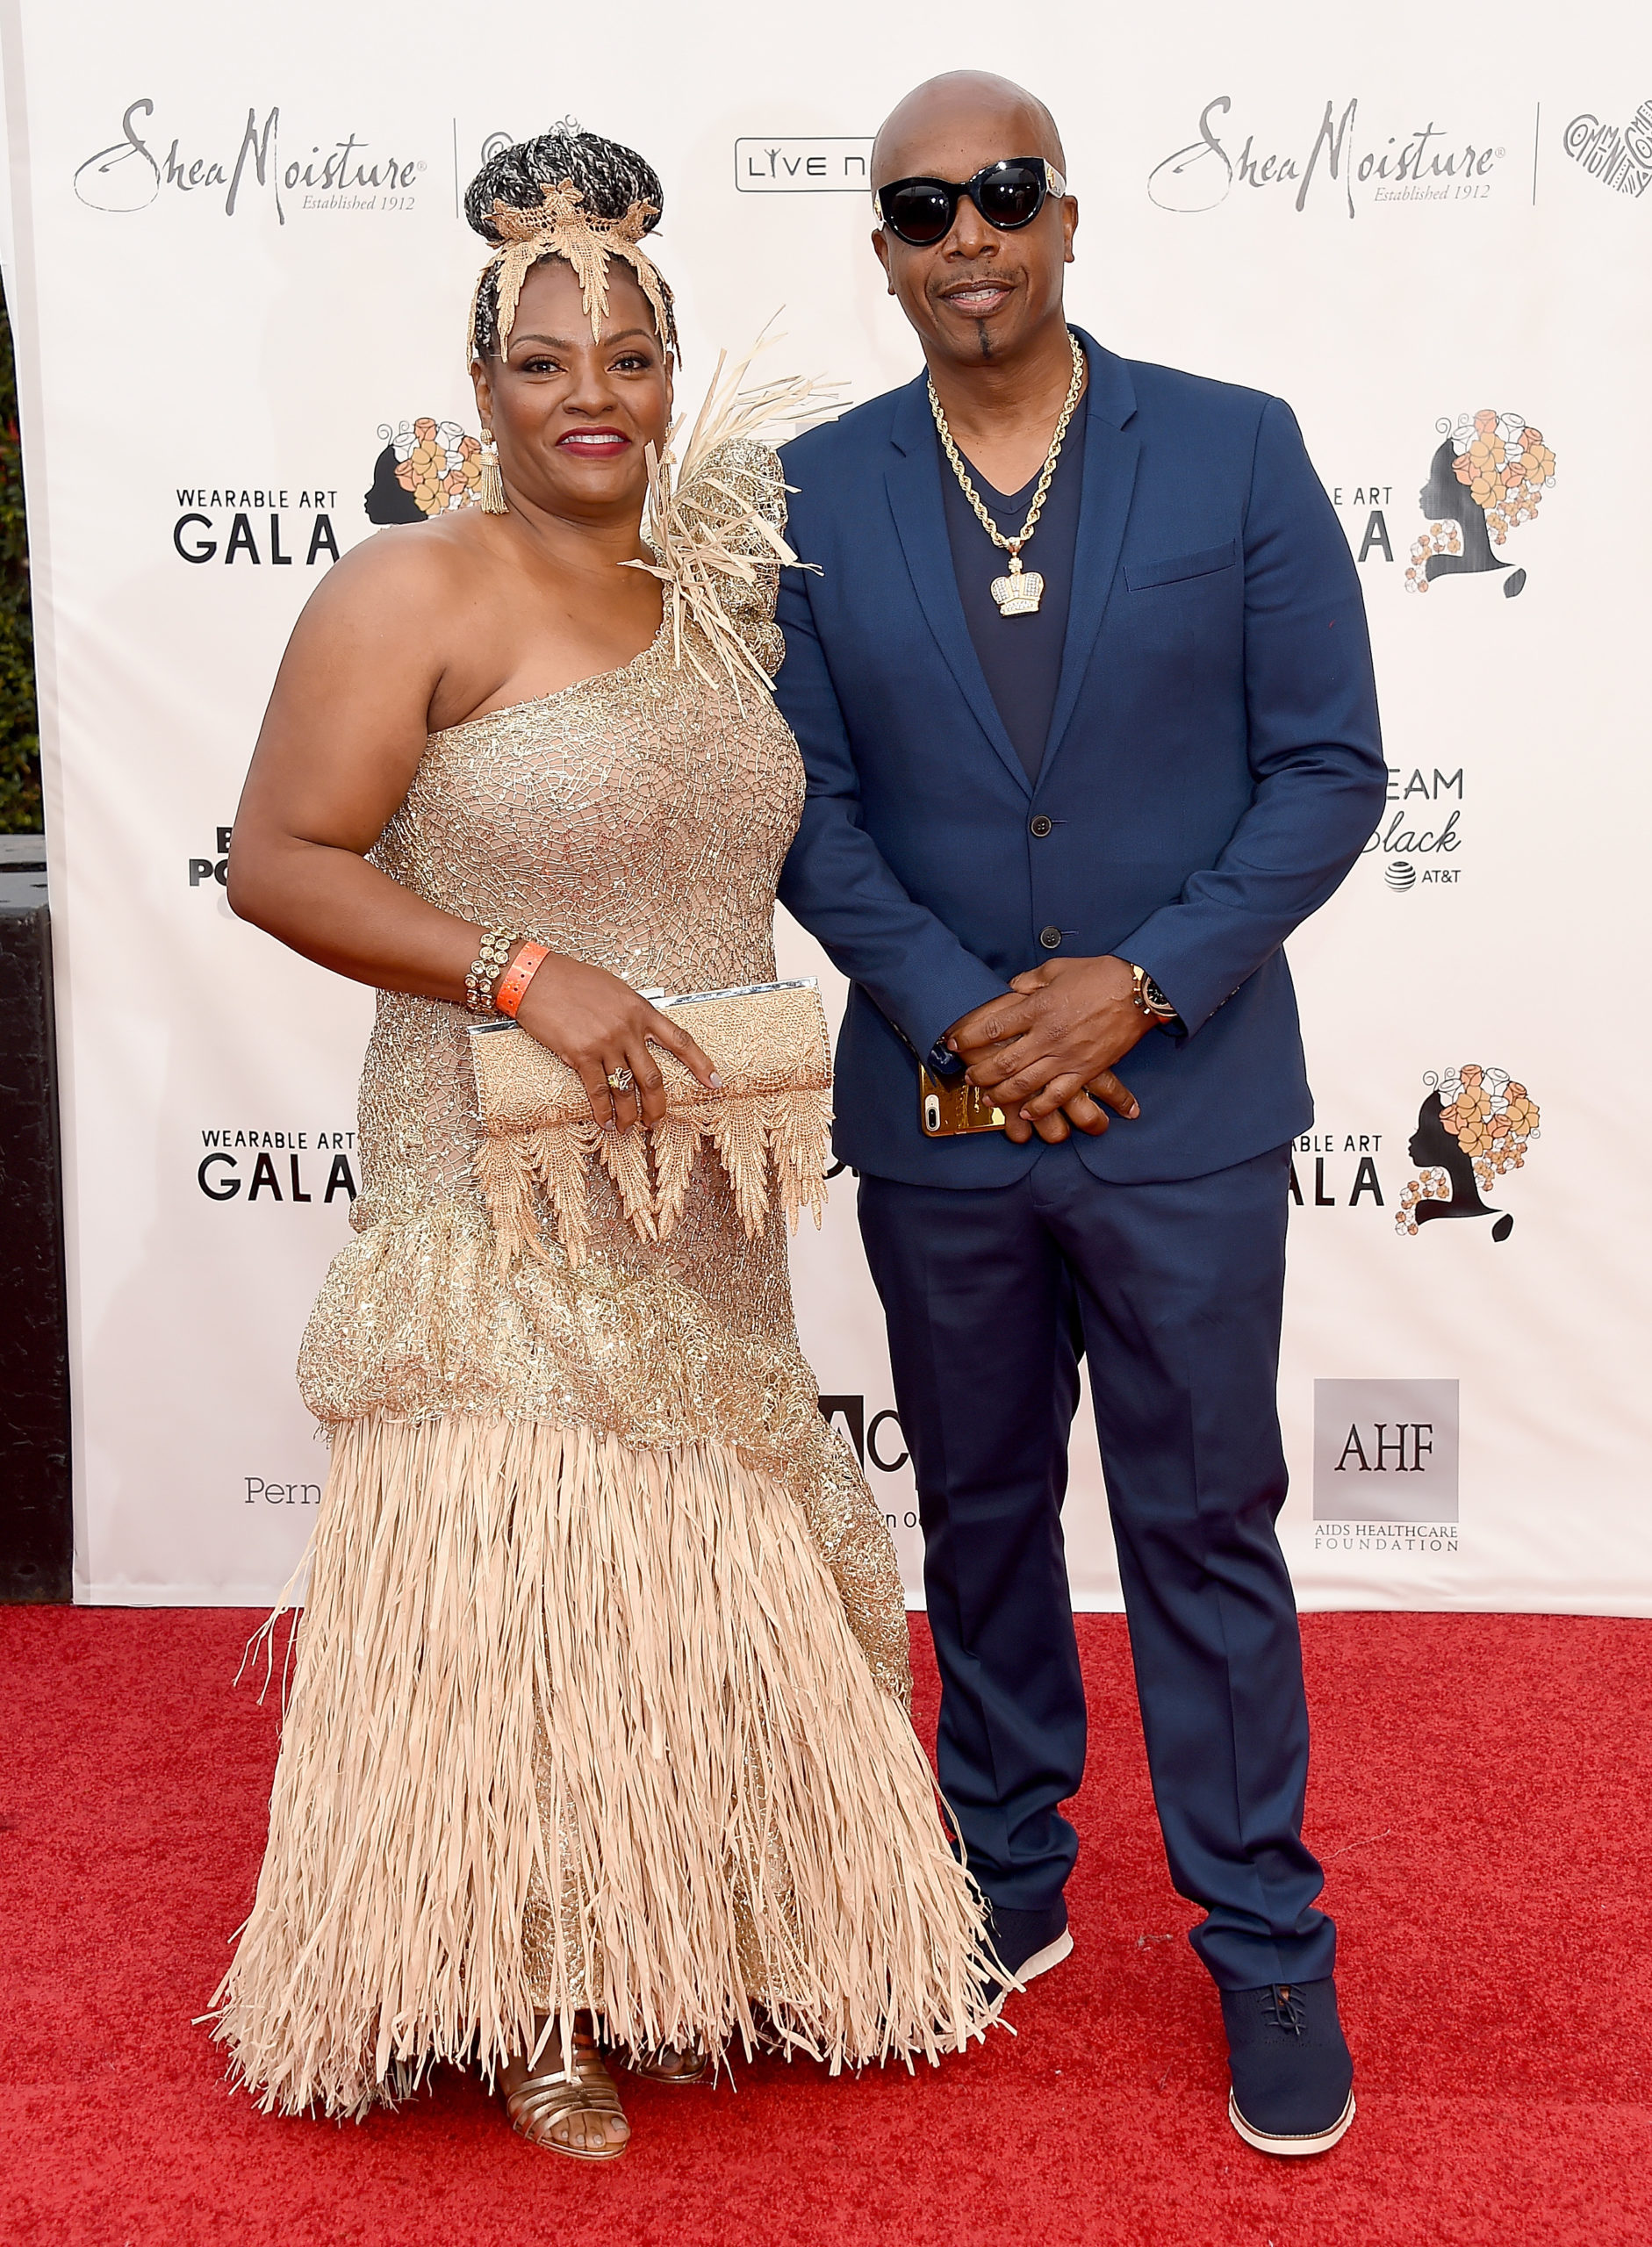 MC Hammer Celebrates 35 Years Married! - BlackDoctor.org - Where